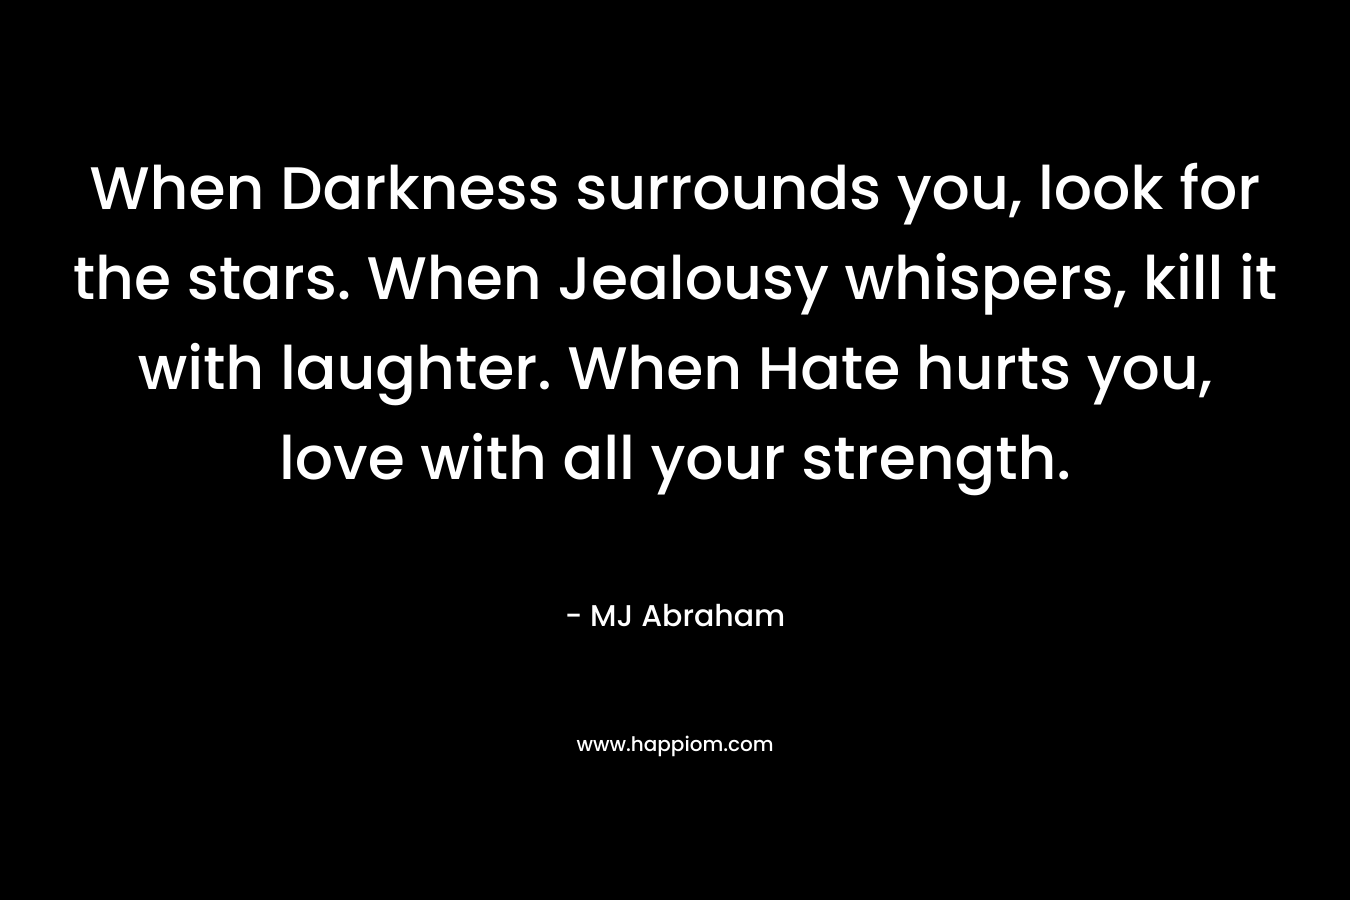 When Darkness surrounds you, look for the stars. When Jealousy whispers, kill it with laughter. When Hate hurts you, love with all your strength.